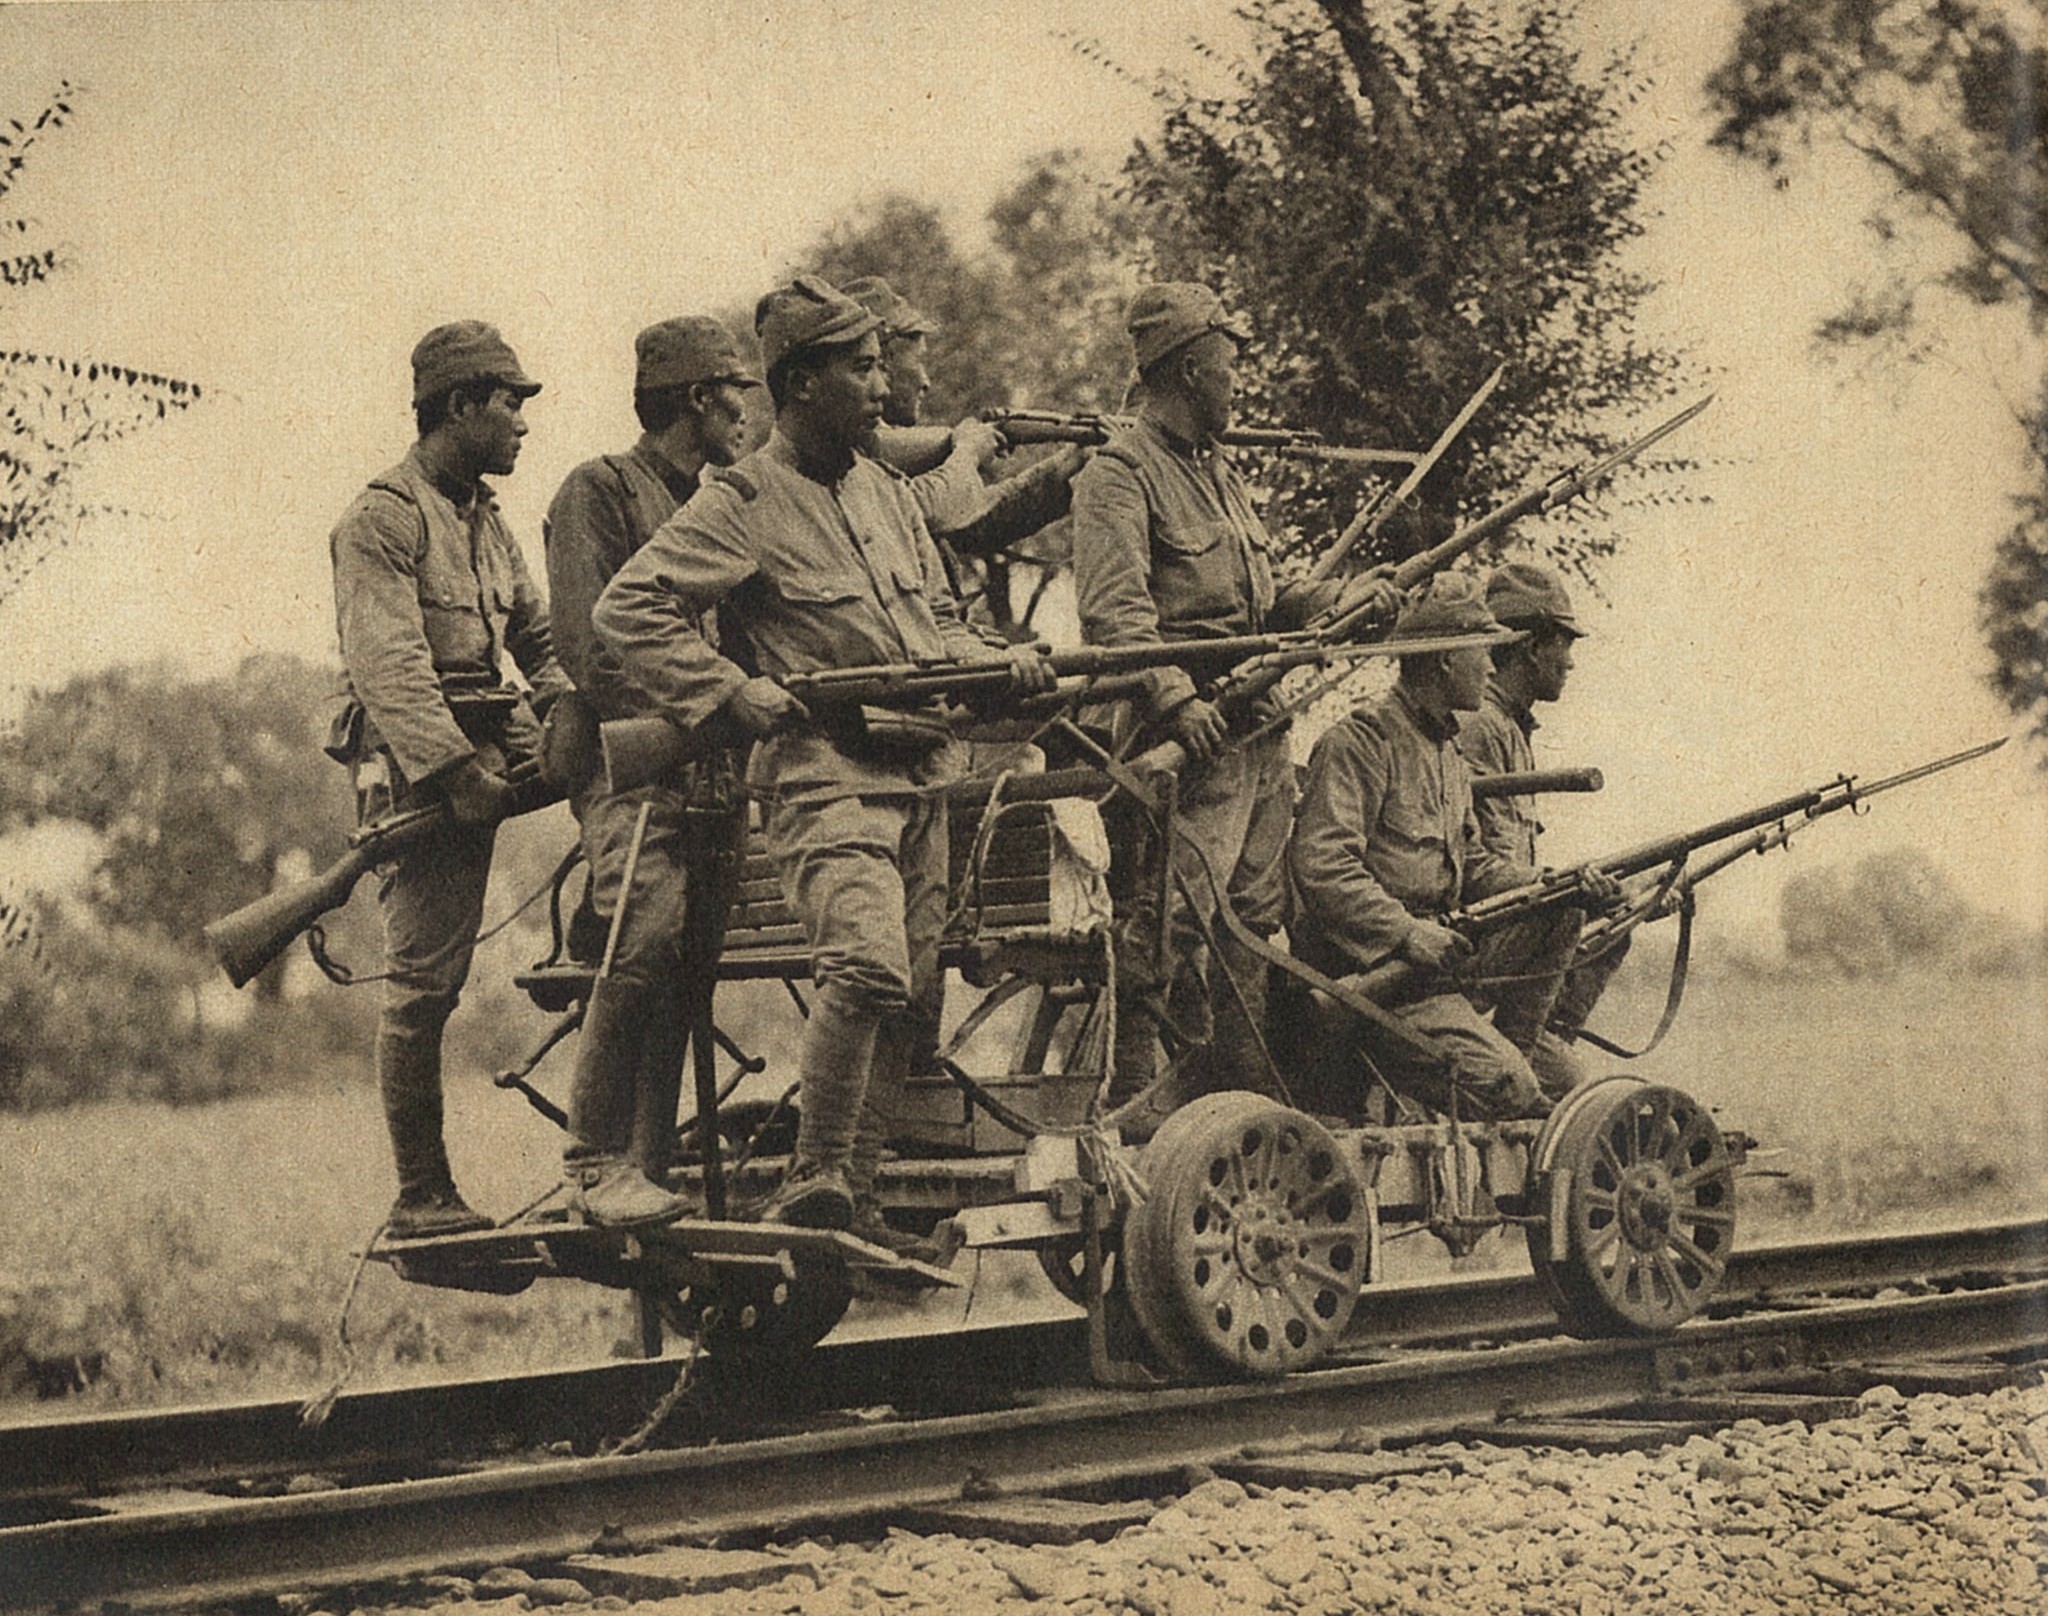 Japanese Army soldiers with Arisaka Type 38 rifles on a hand cart, China, 1937; seen in the 1 Sep 1937 issue of the Japanese publication Asahigraph